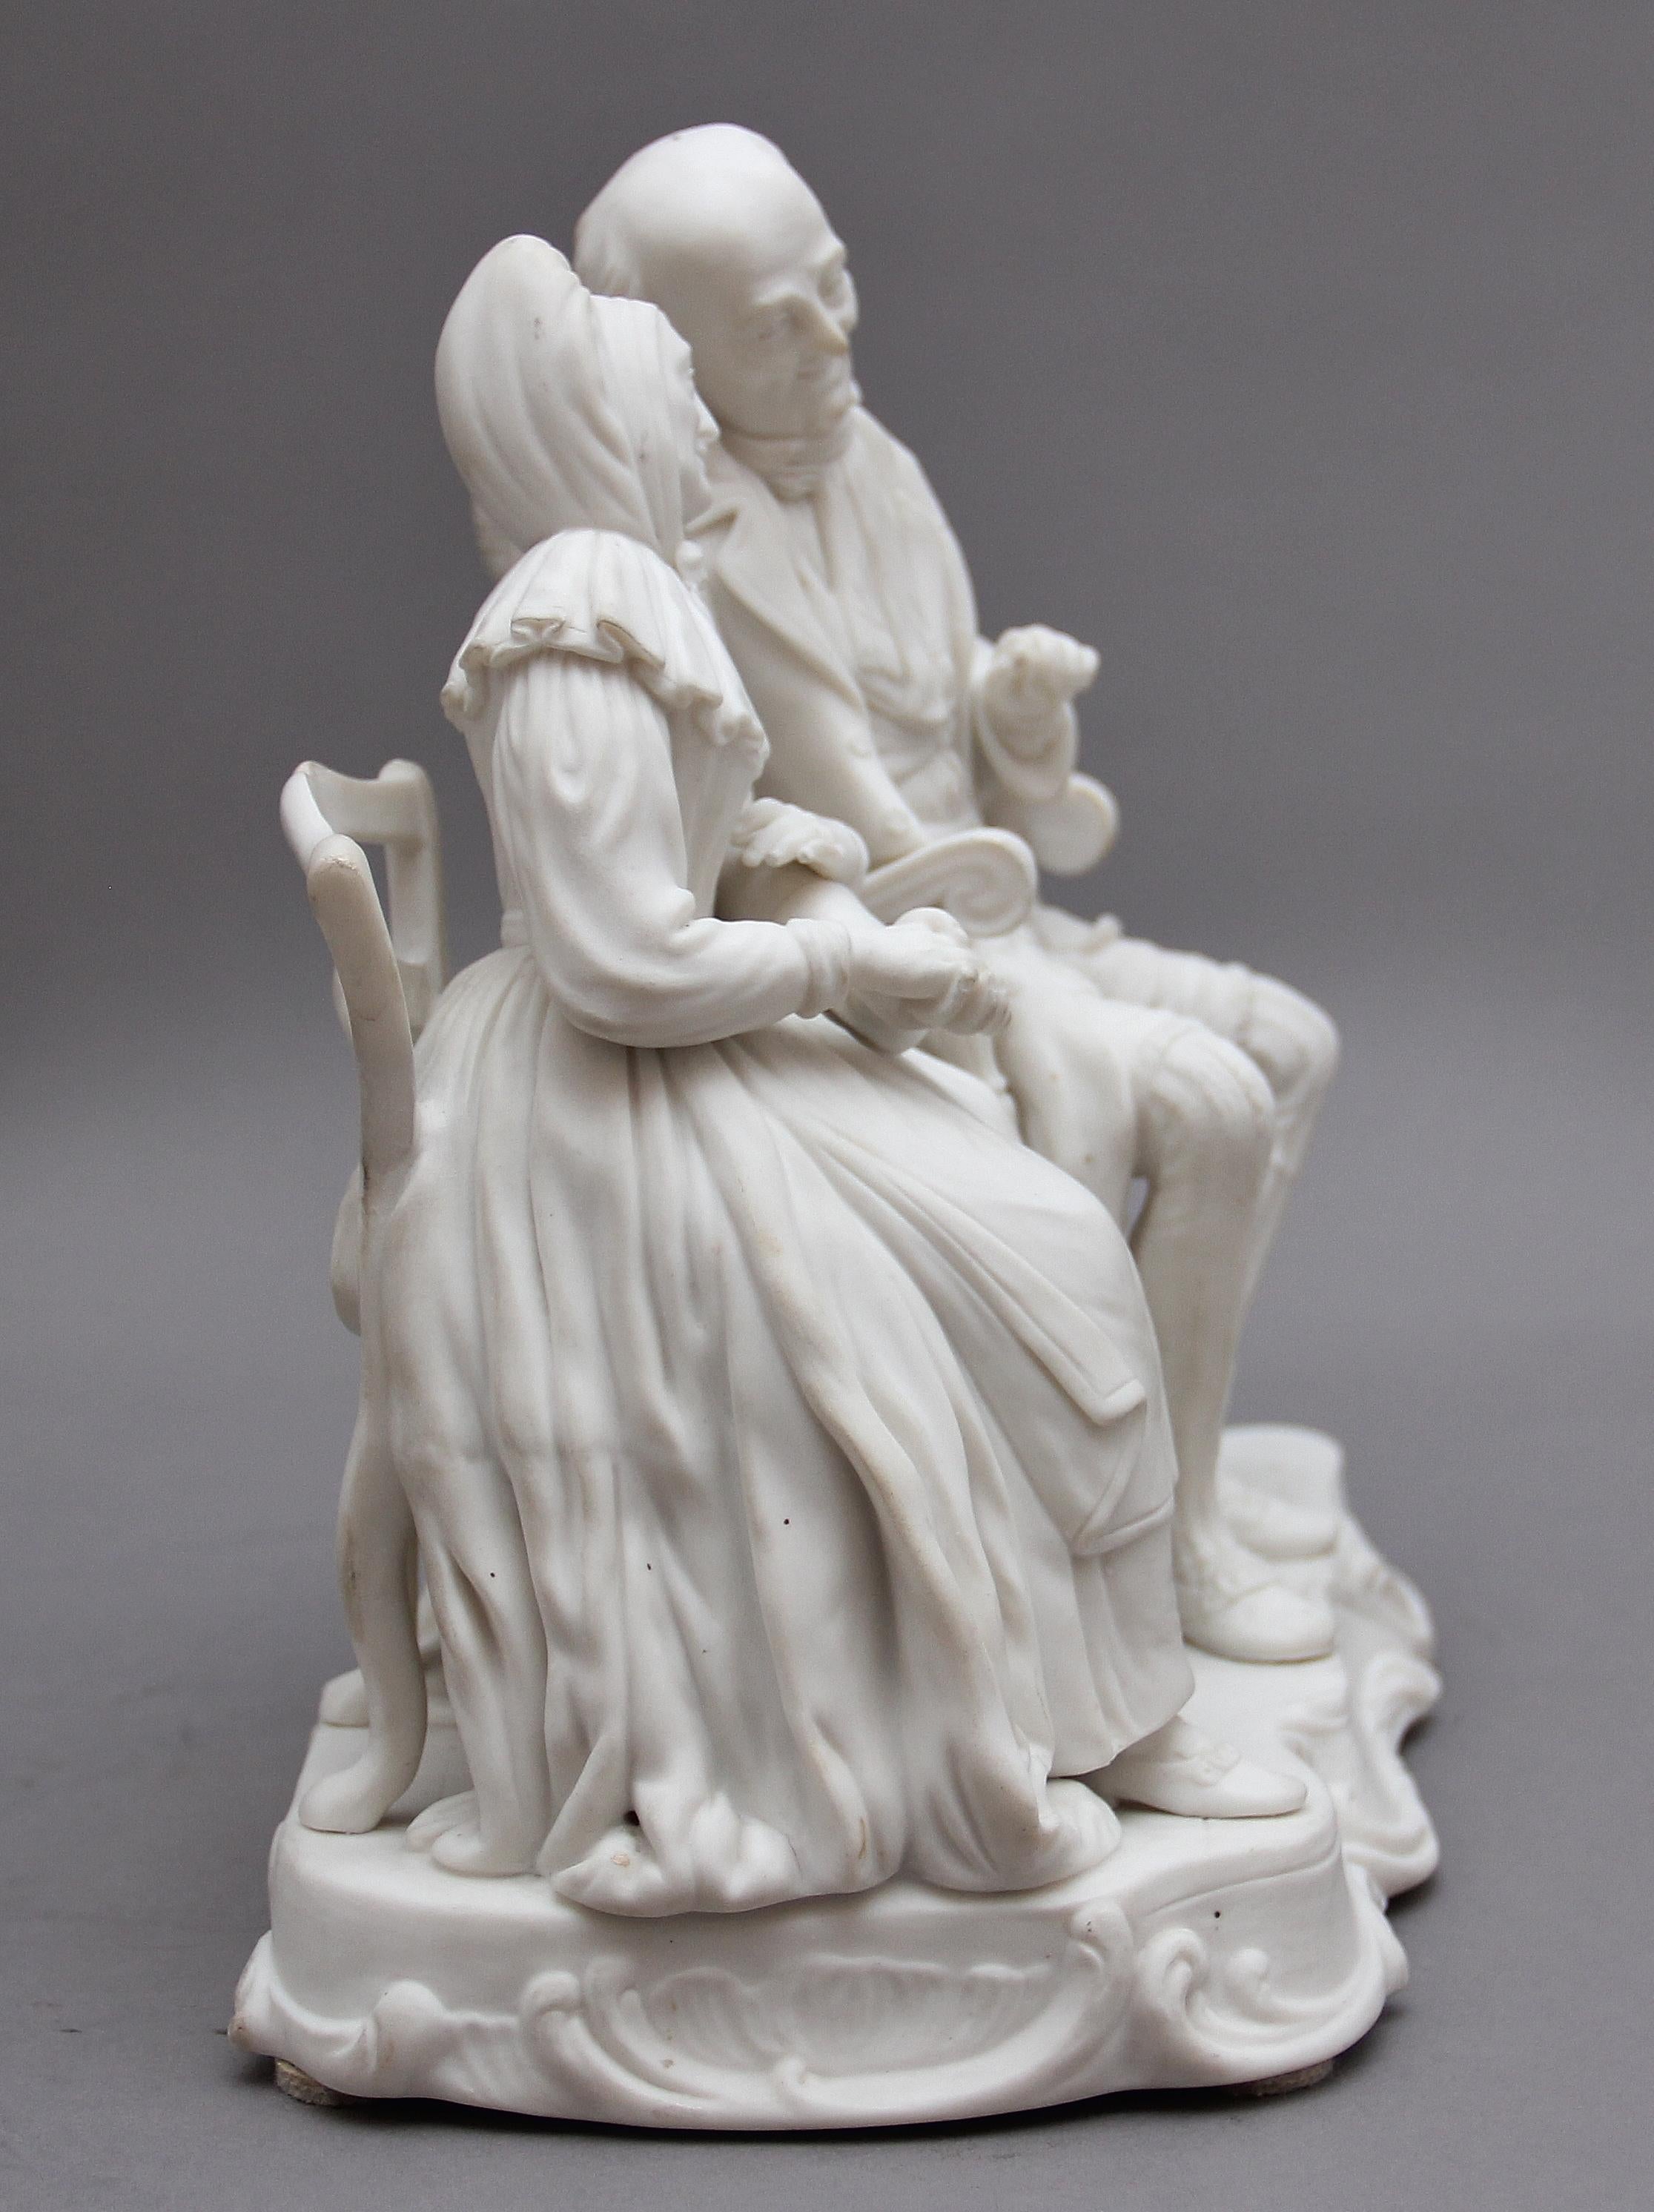 A highly decorative and detailed 19th century Parian figure group of a Dickensian couple, the couple sitting in their own chairs with a cat and dog beside them, the base is marked “John Anderson My Jo” Circa 1850.

 